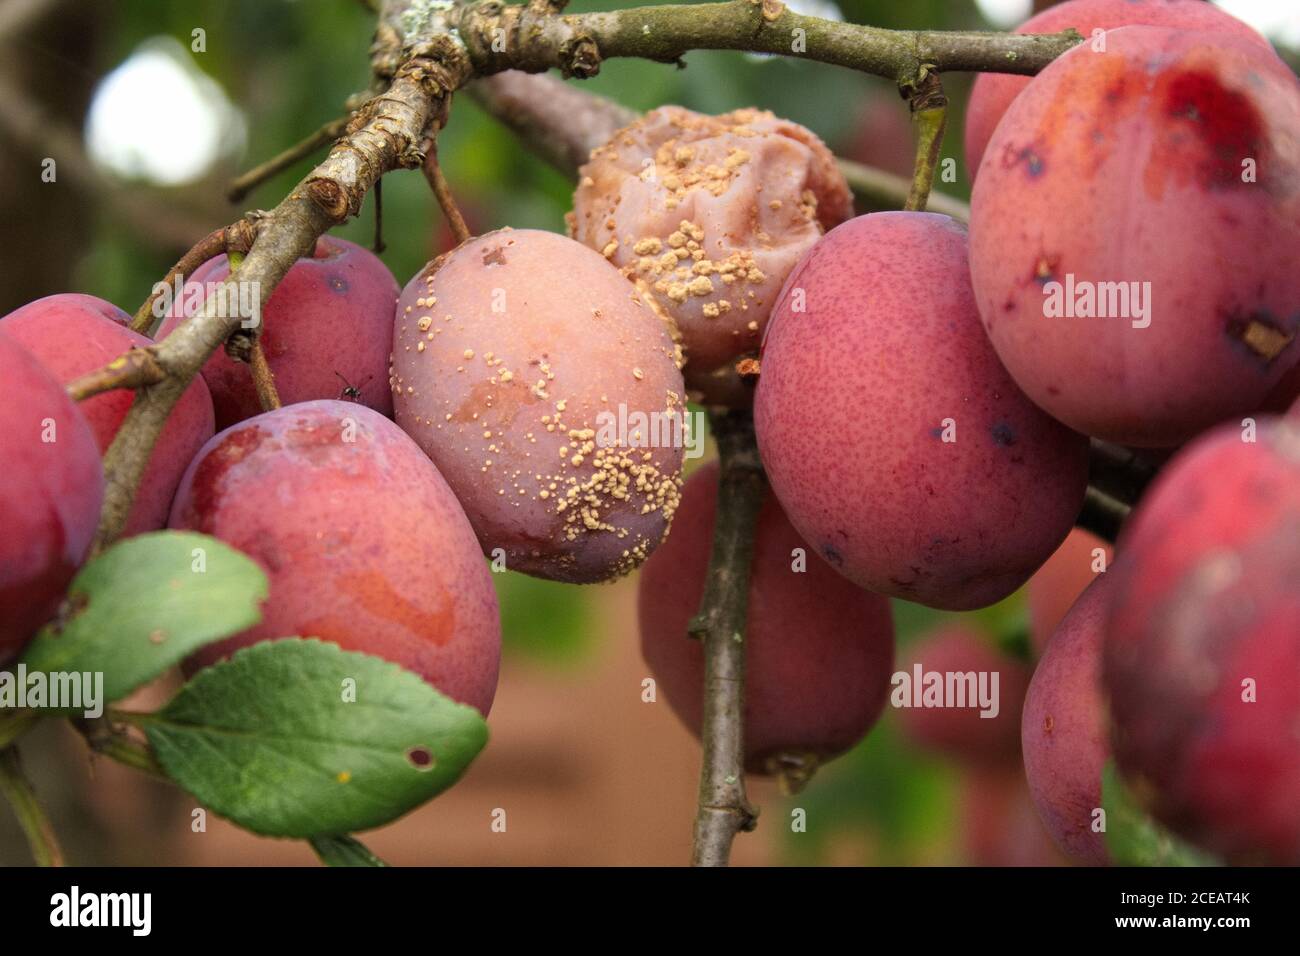 Ripe and rotten plums on tree Stock Photo